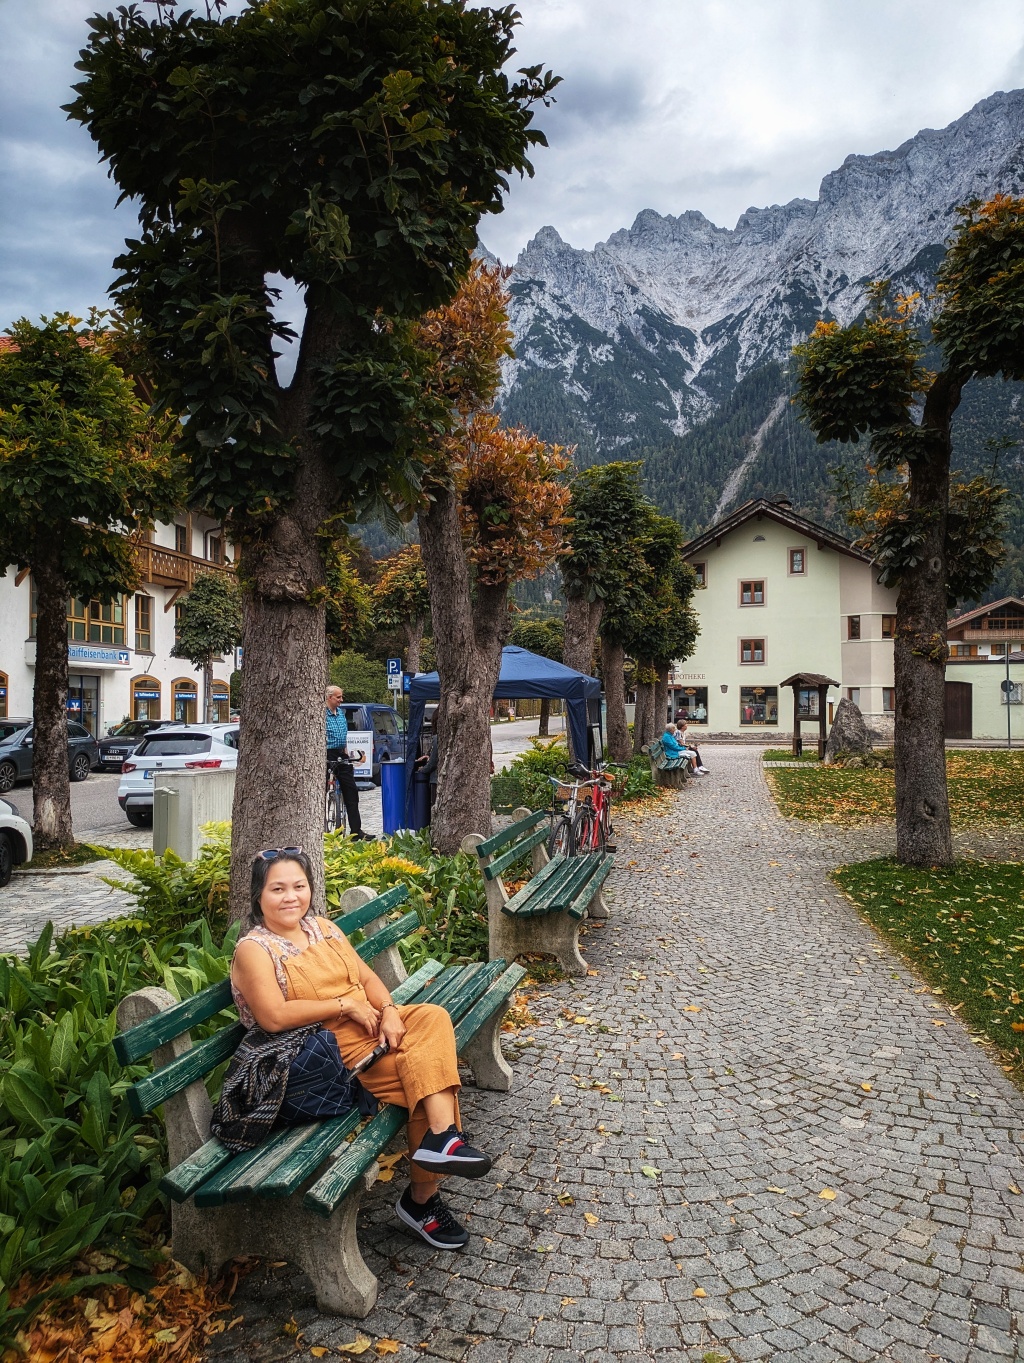 Mittenwald, Germany – A charming Bavarian town